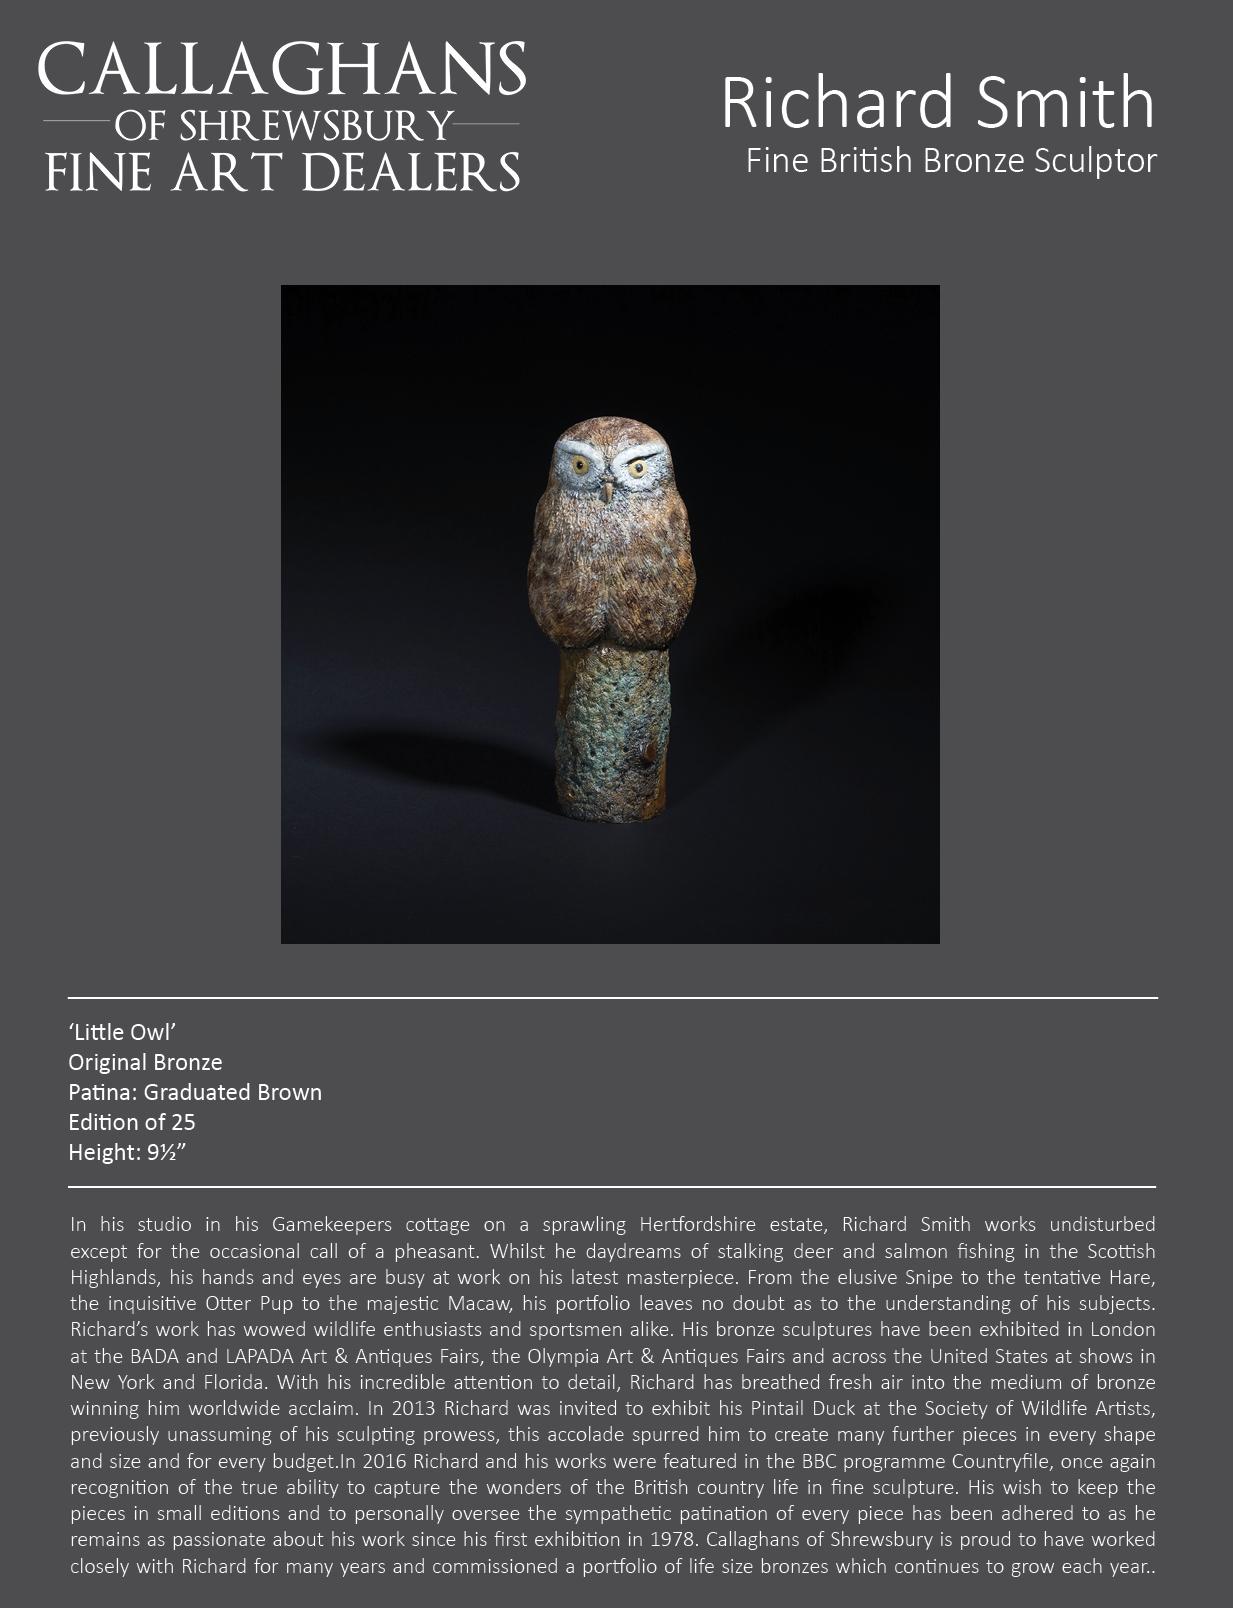 Contemporary Solid Bronze Wildlife Sculpture 'Little Owl' by Richard Smith - Gold Still-Life Sculpture by Richard Smith b.1955